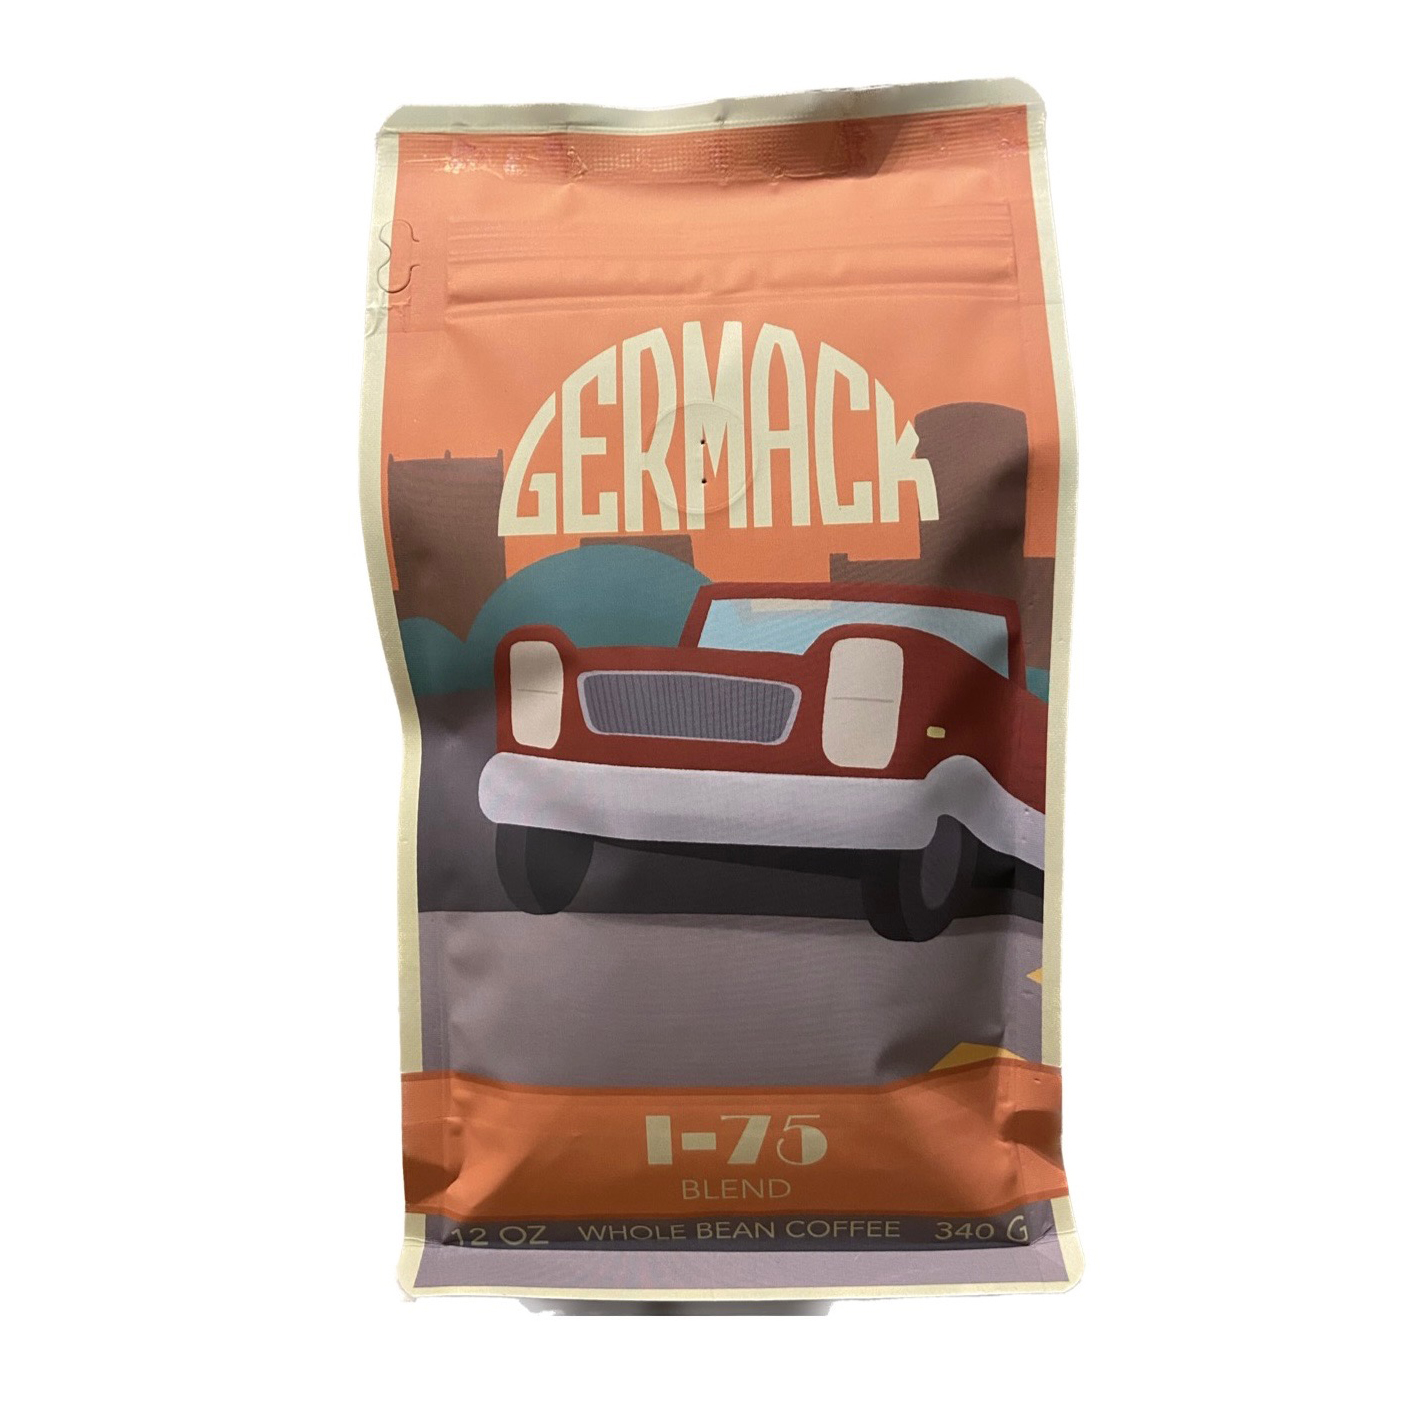 Picture Germack Coffee Blend (12 oz.) - I-75